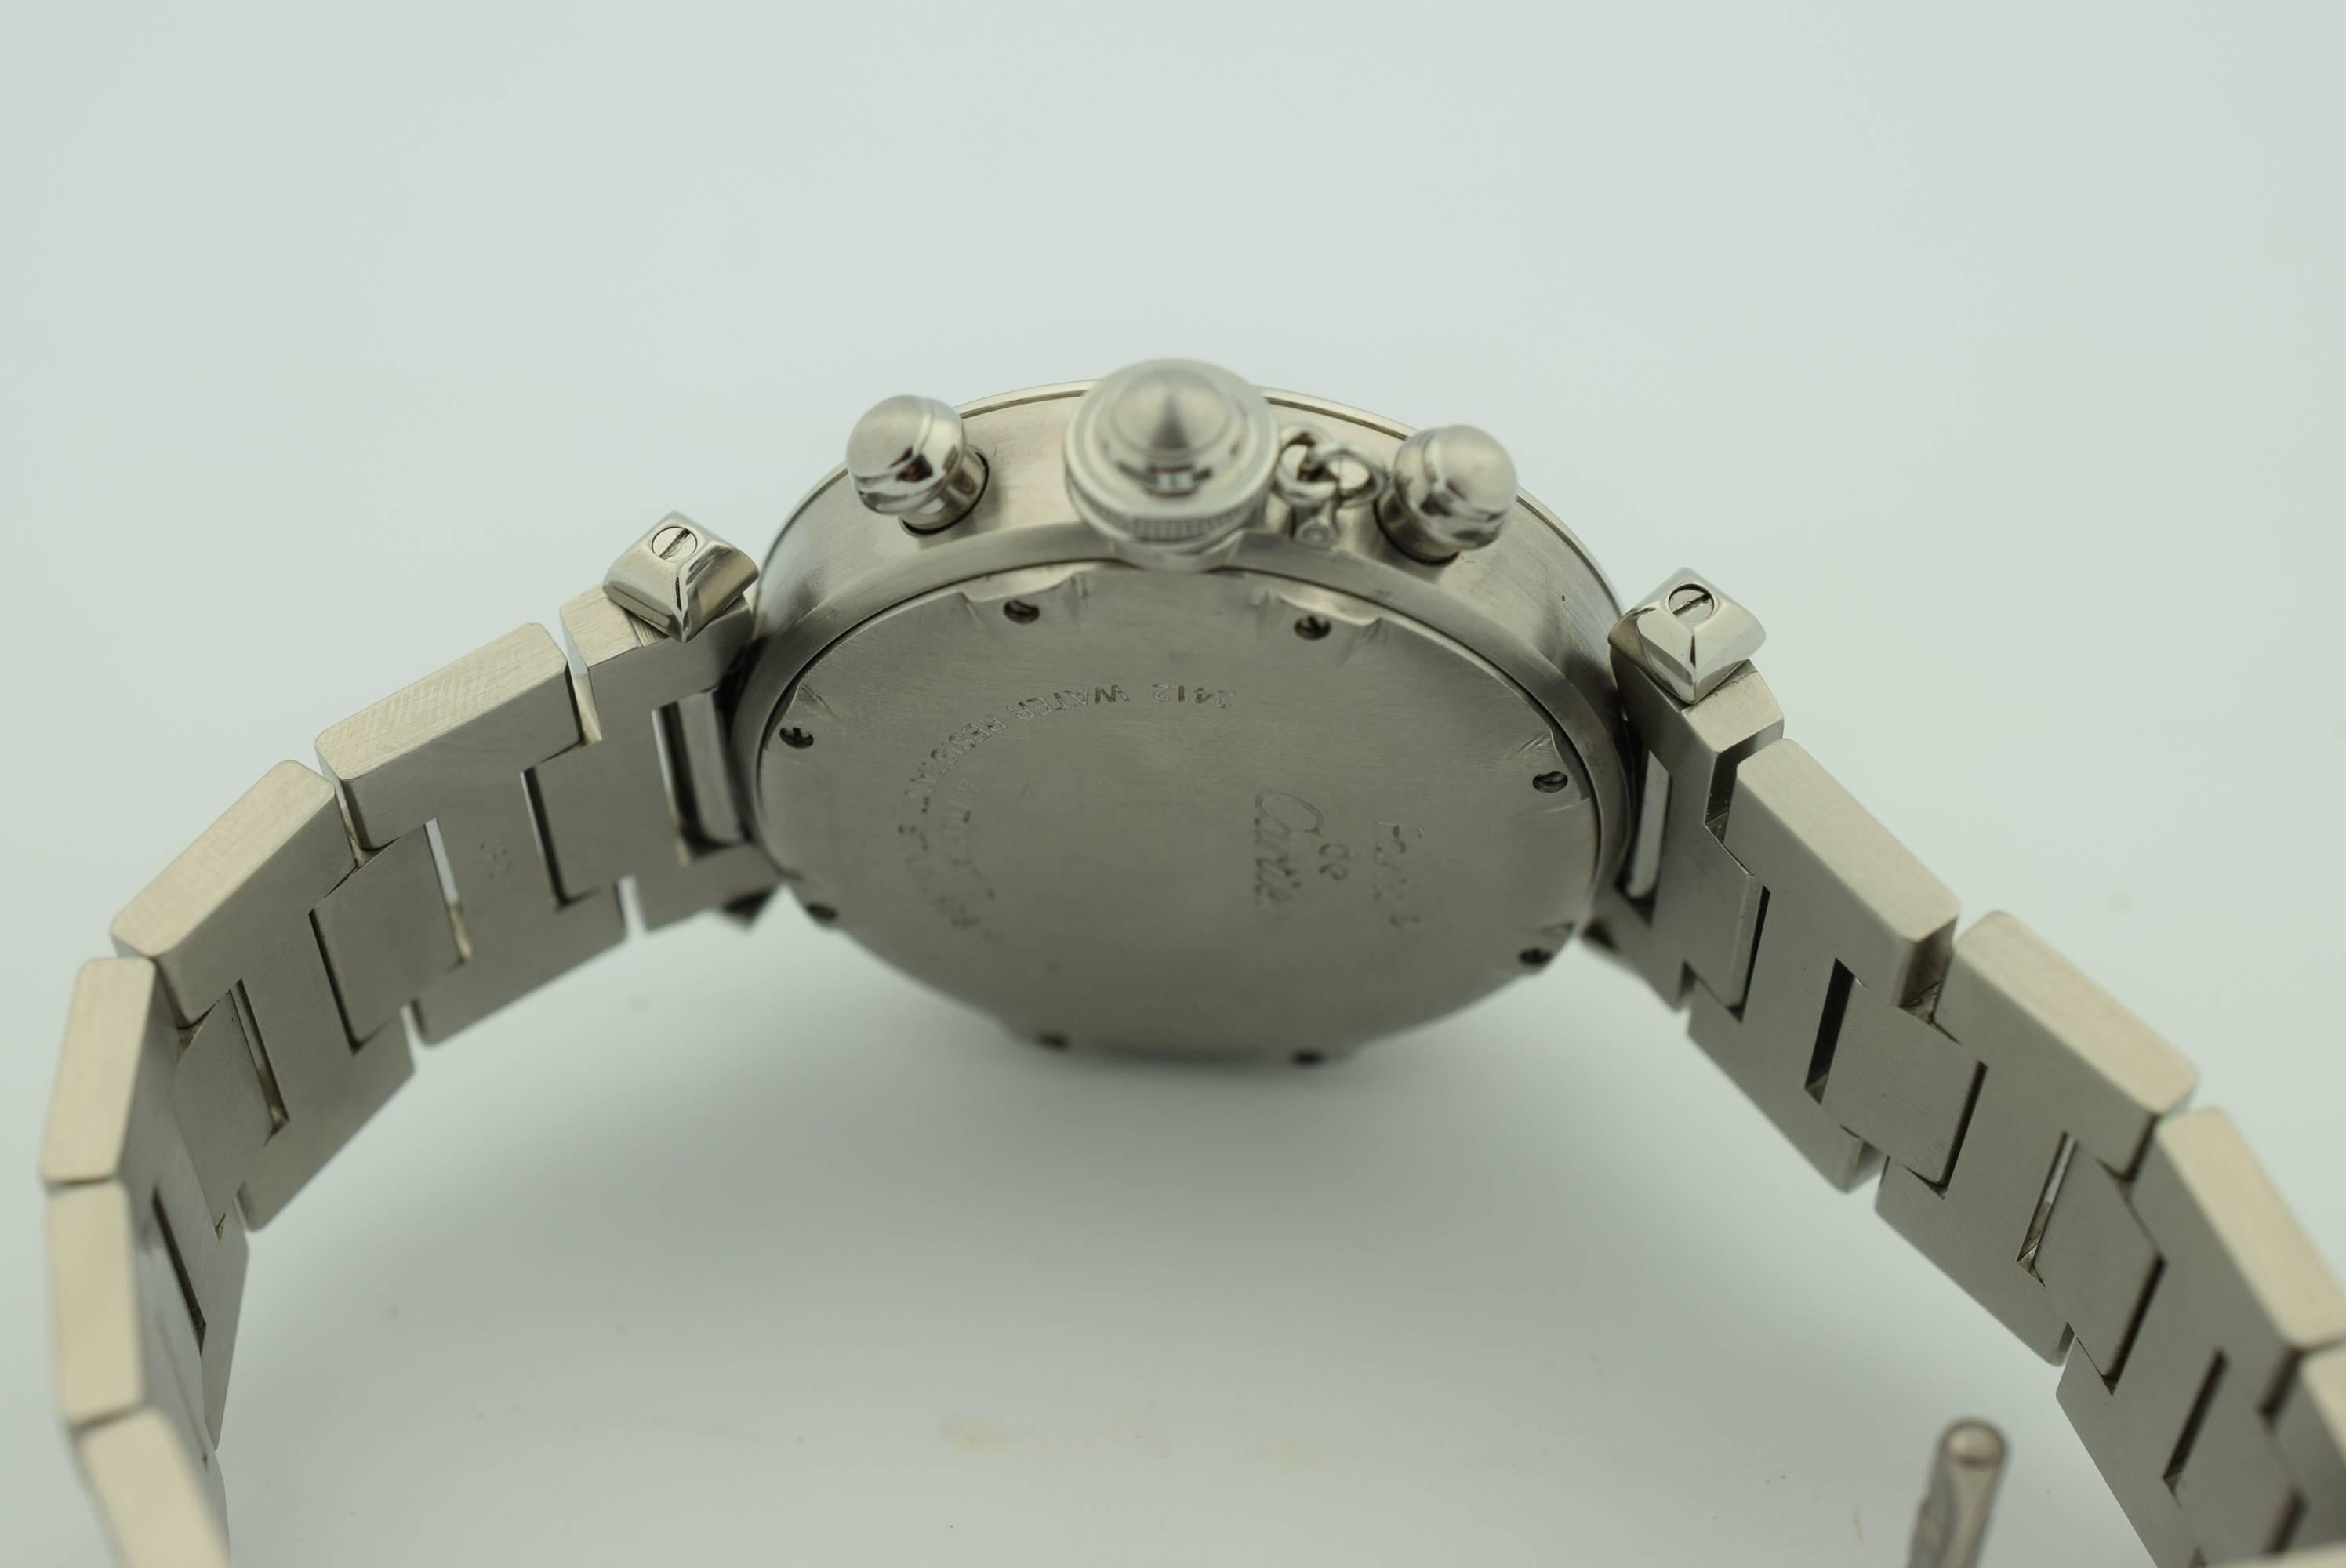 Cartier Stainless Steel Automatic Pasha Chronograph Wristwatch Ref 2412 2